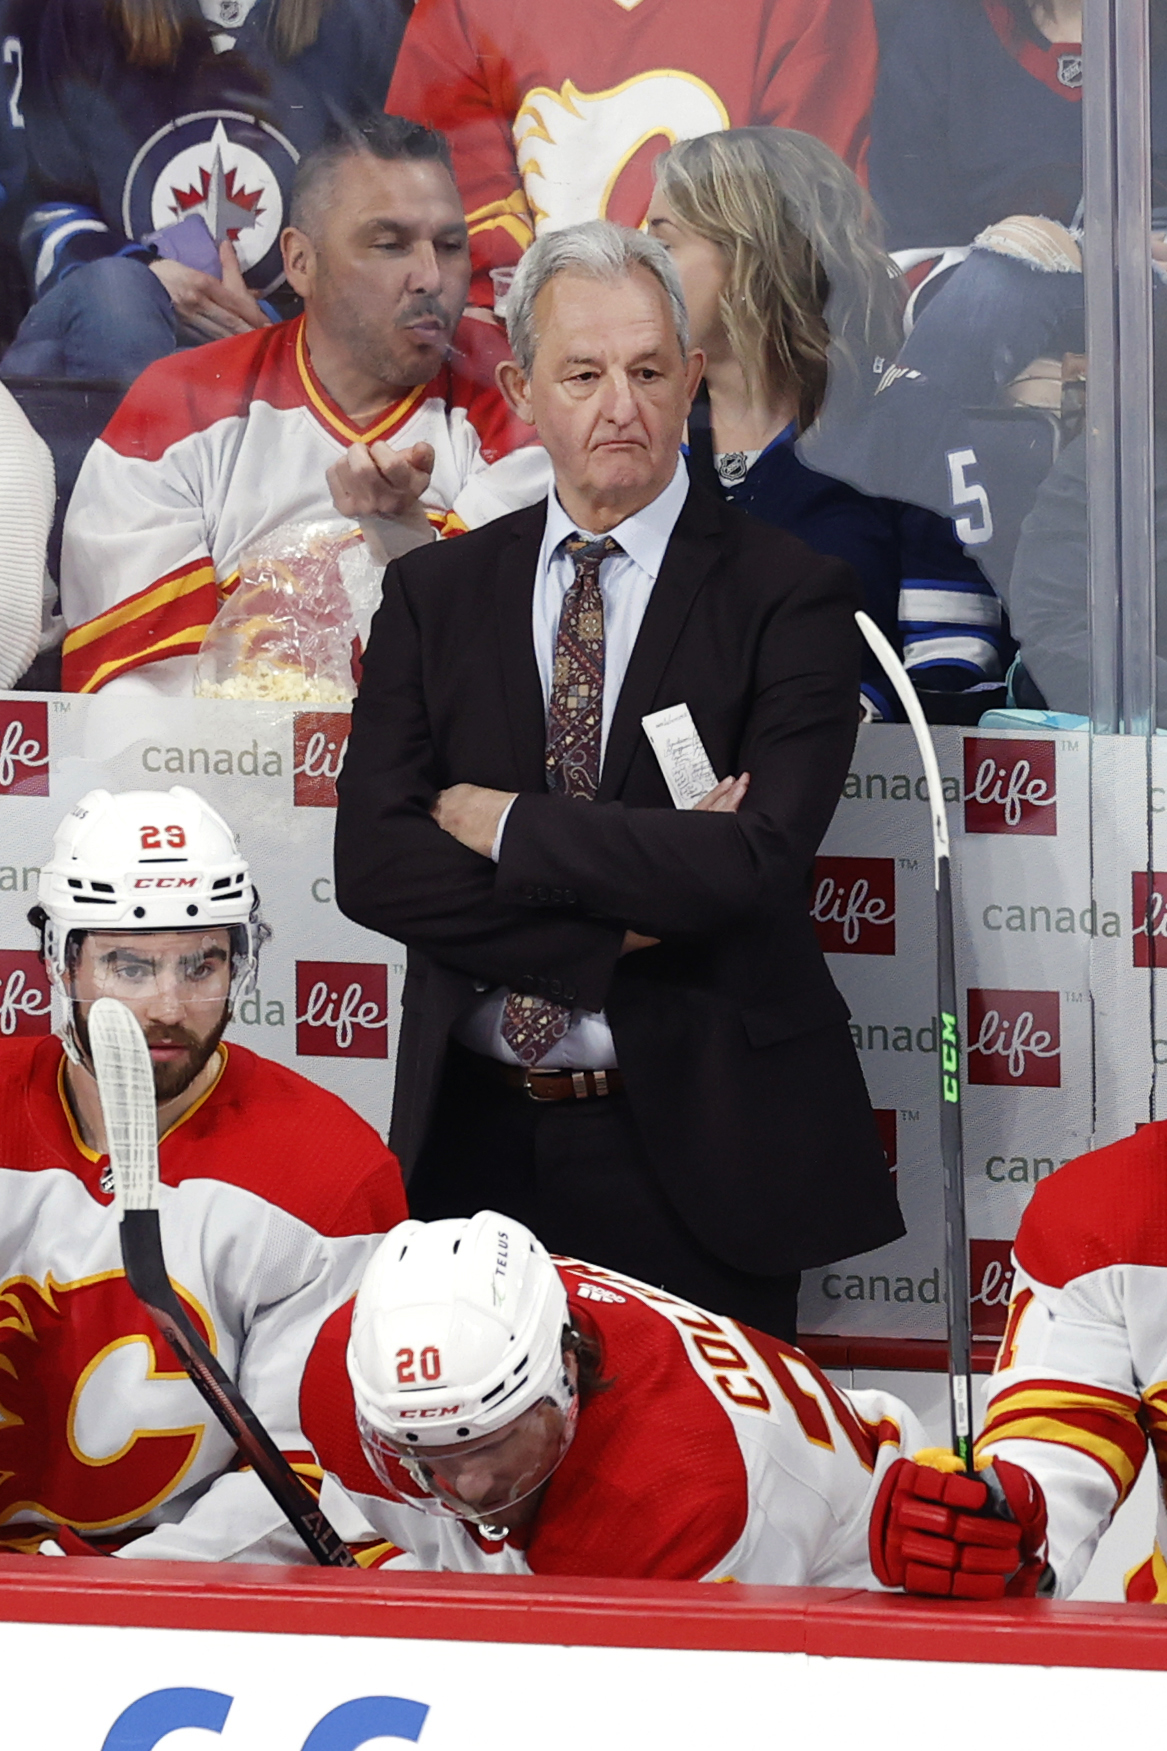 Flames Sign Darryl Sutter To A Two-Year Extension | Pro Hockey Rumors